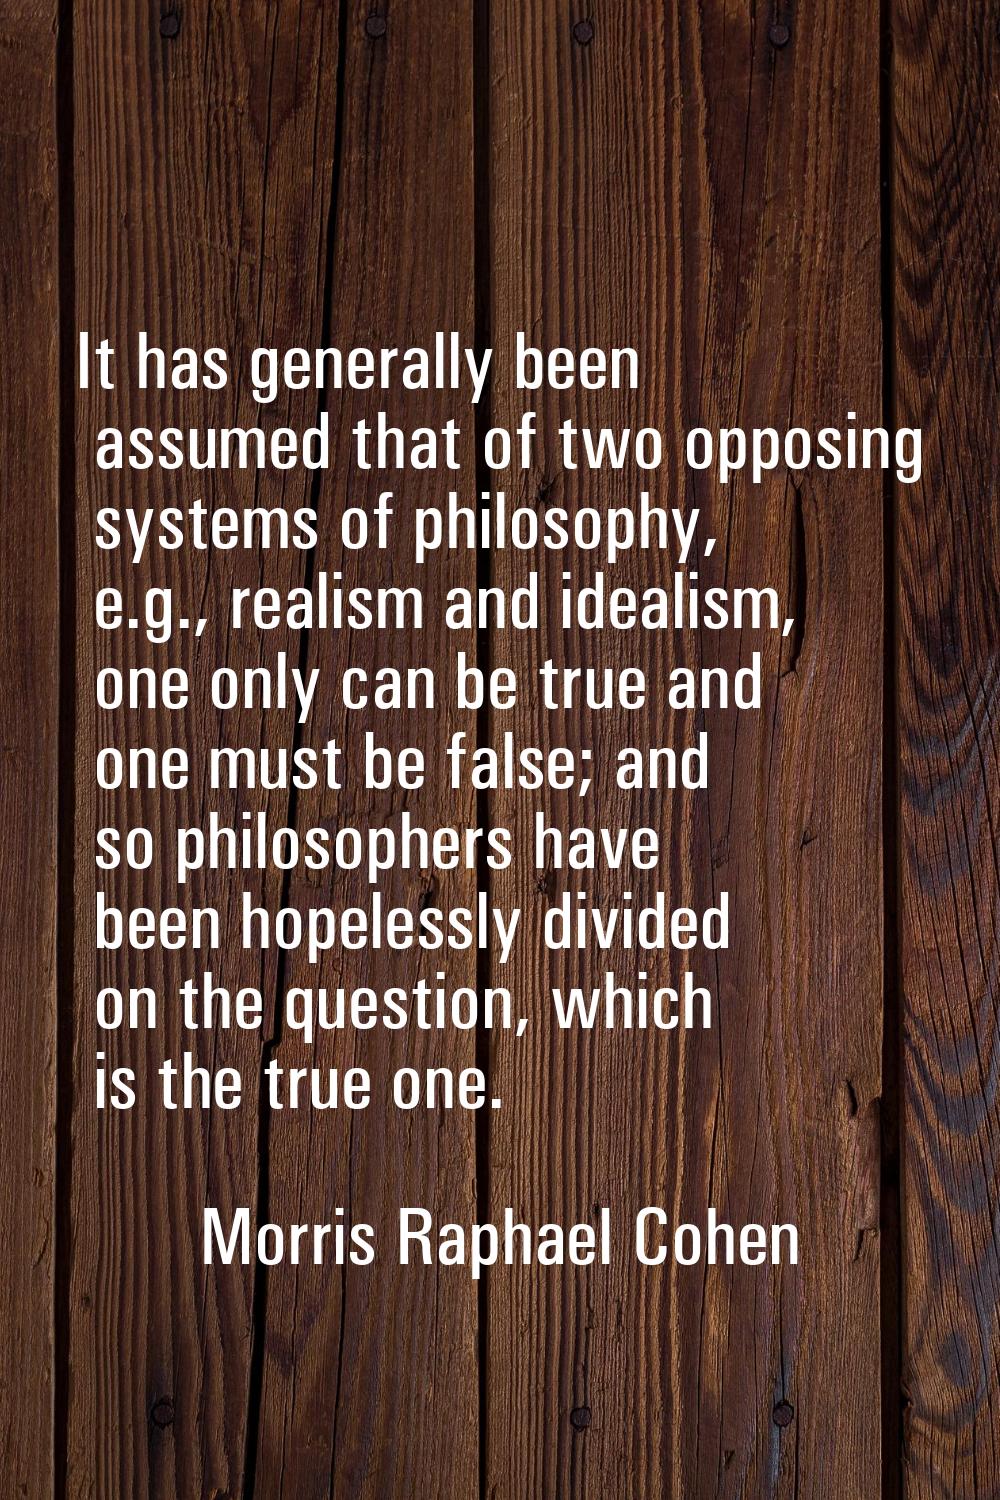 It has generally been assumed that of two opposing systems of philosophy, e.g., realism and idealis